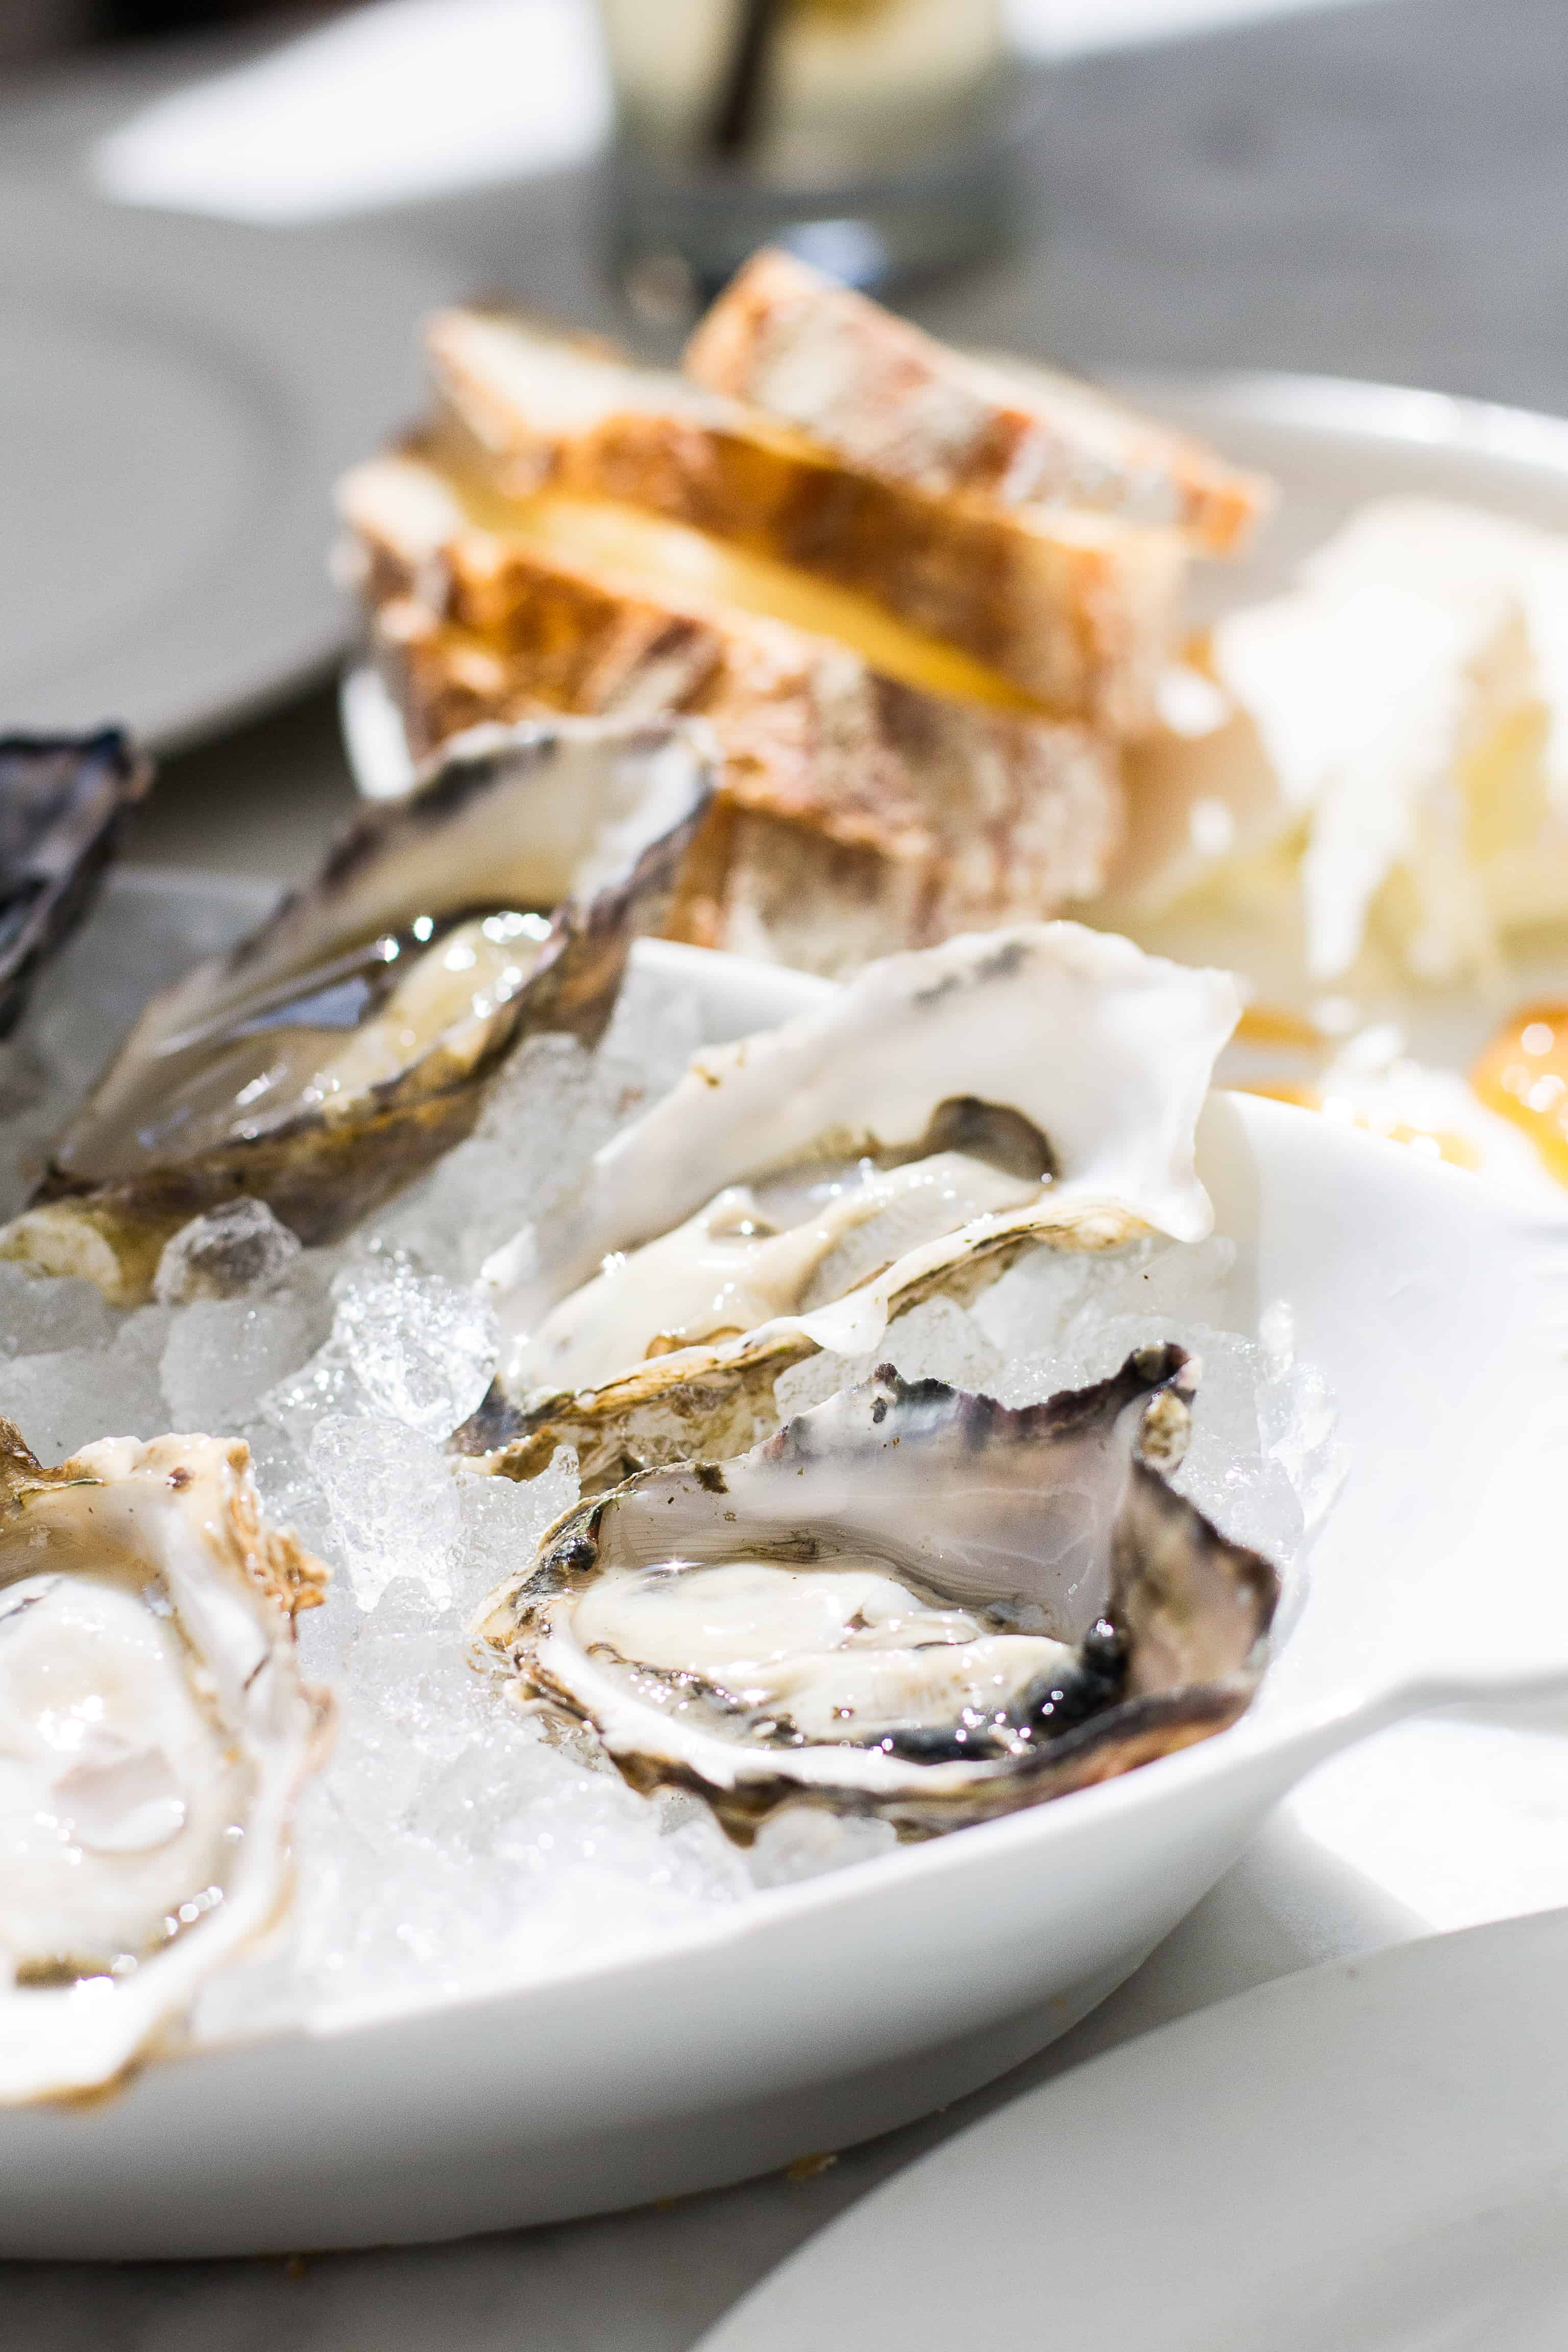 Seattle is synonymous with seafood. Read this post for a list of the best seafood in Seattle from oysters to sushi to poke!